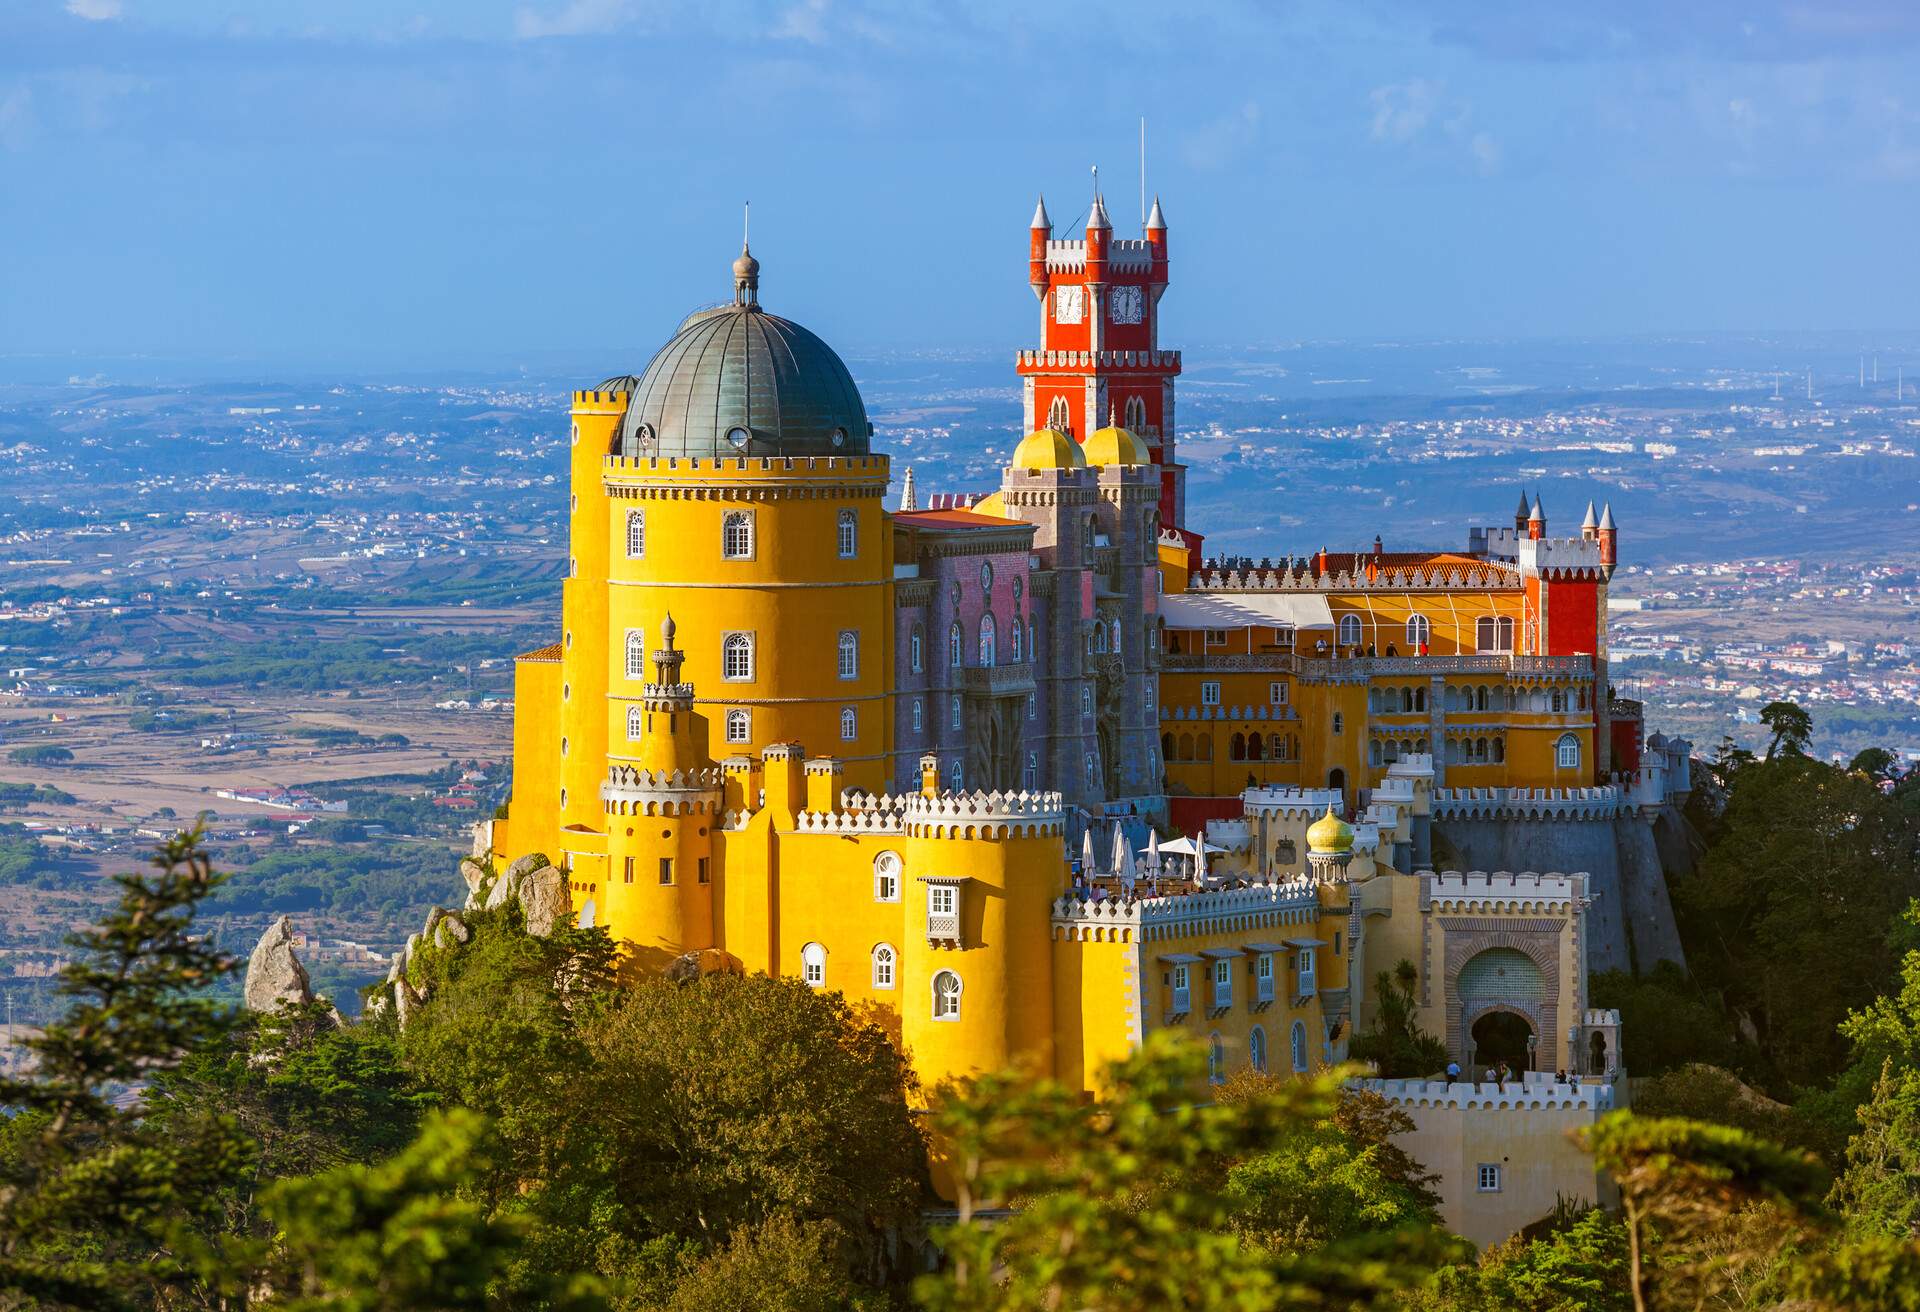 Pena Palace in Sintra - Portugal - architecture background; Shutterstock ID 519387292